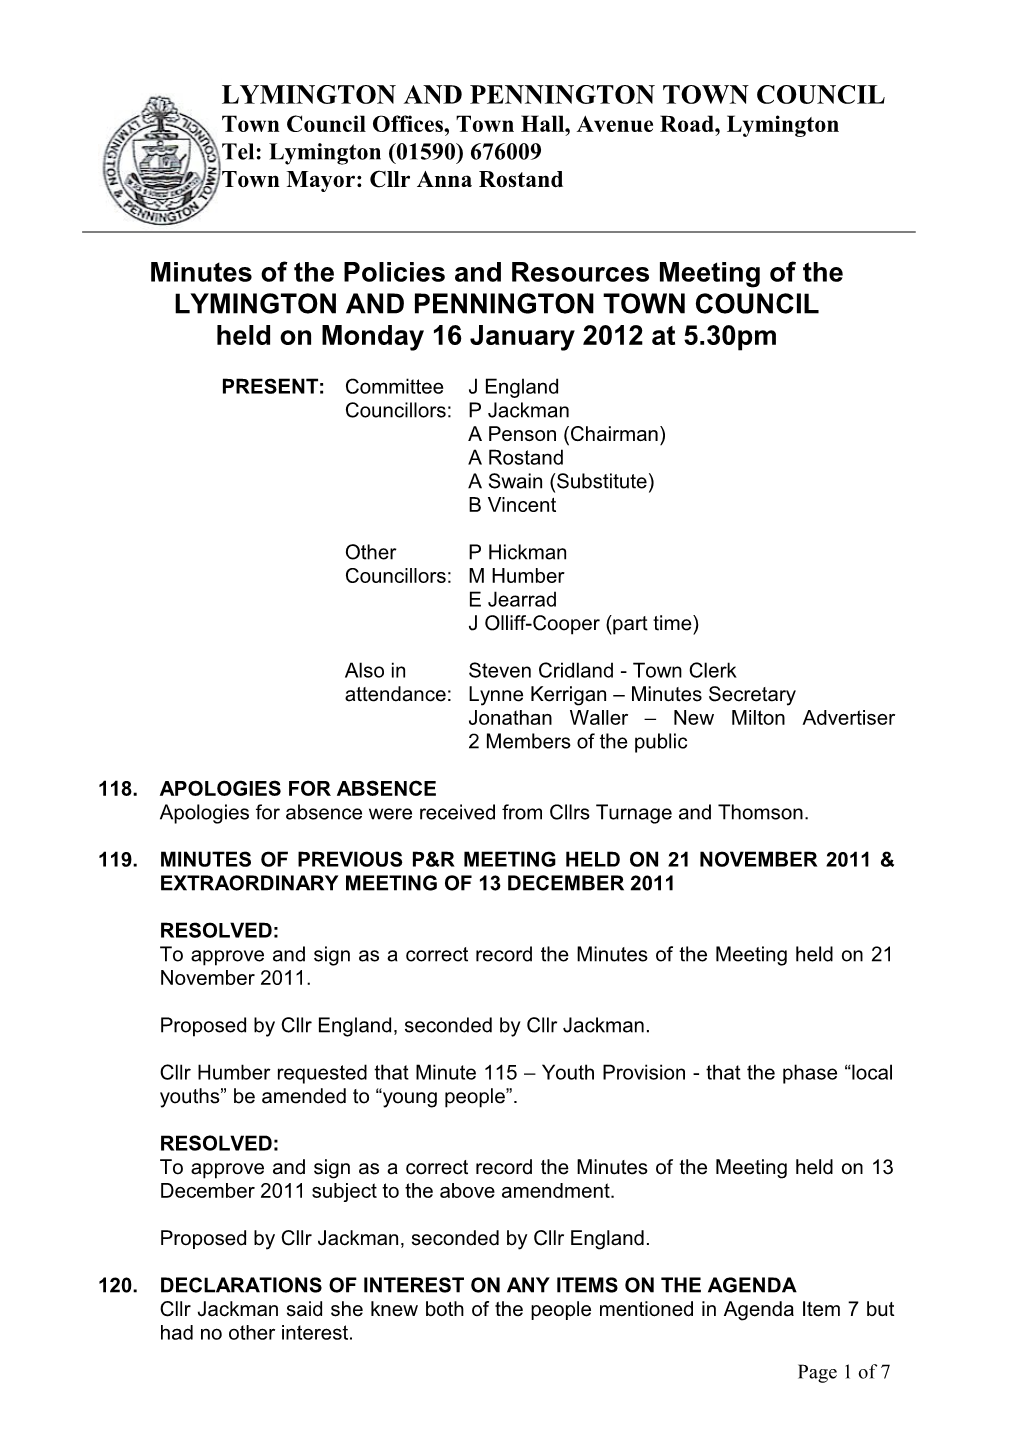 Minutes of the Policies and Resources Meeting of The